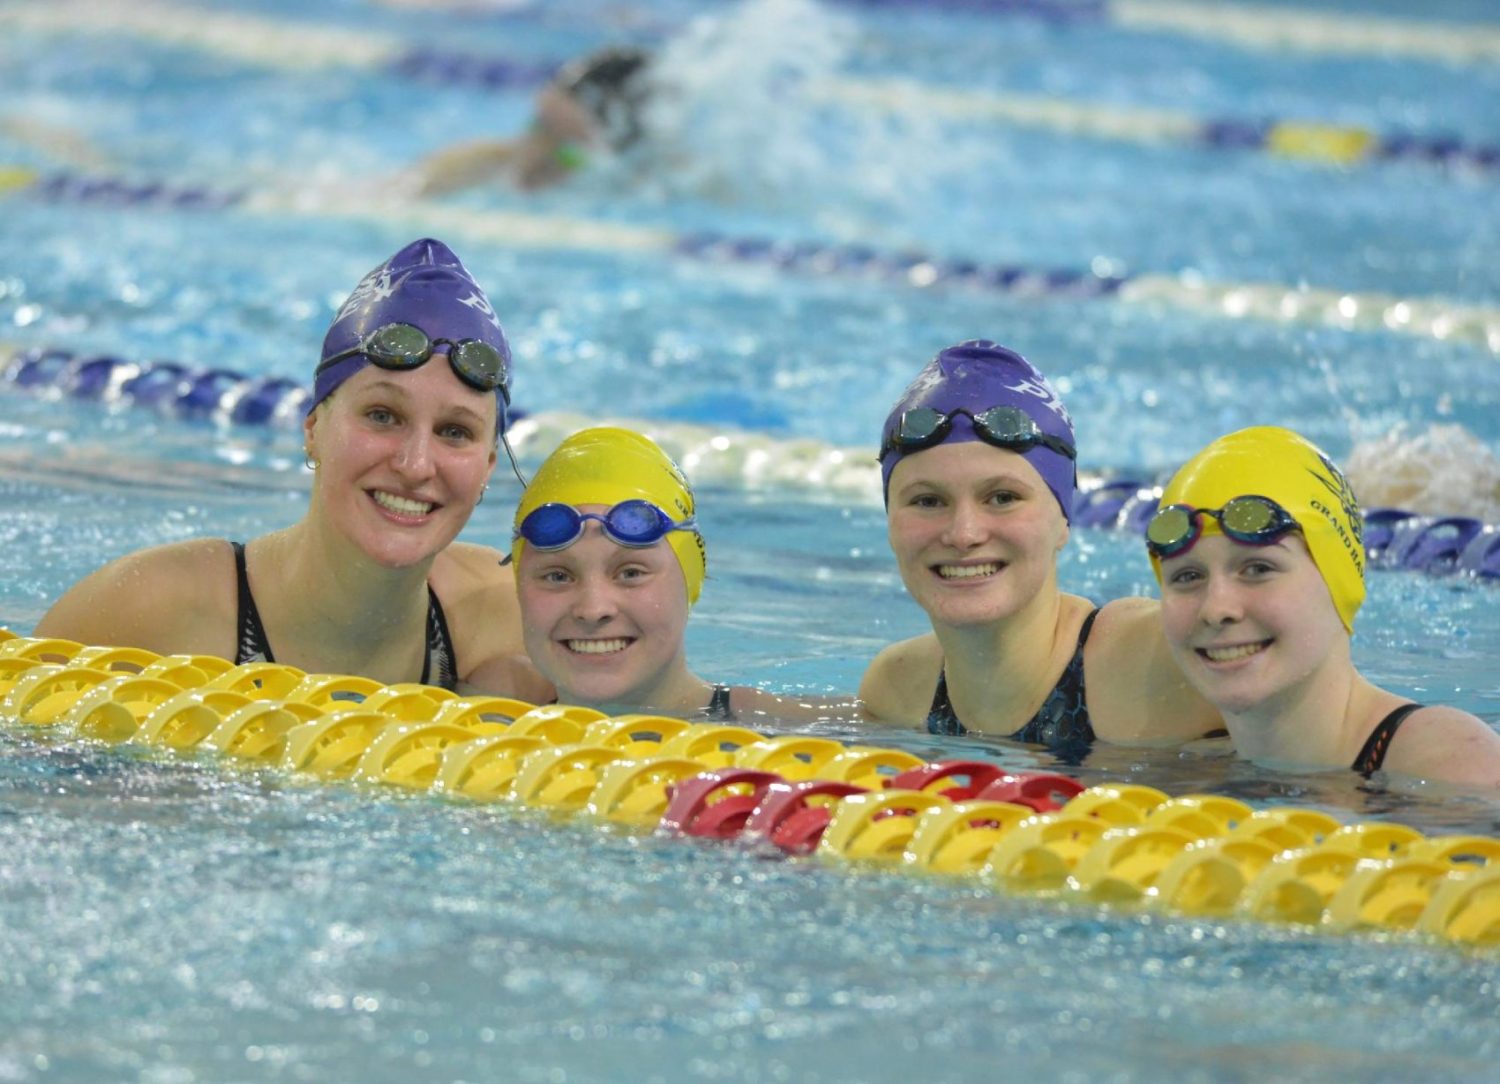 Grand Haven’s ‘Big Four’ garners LSJ monthly honors in swimming